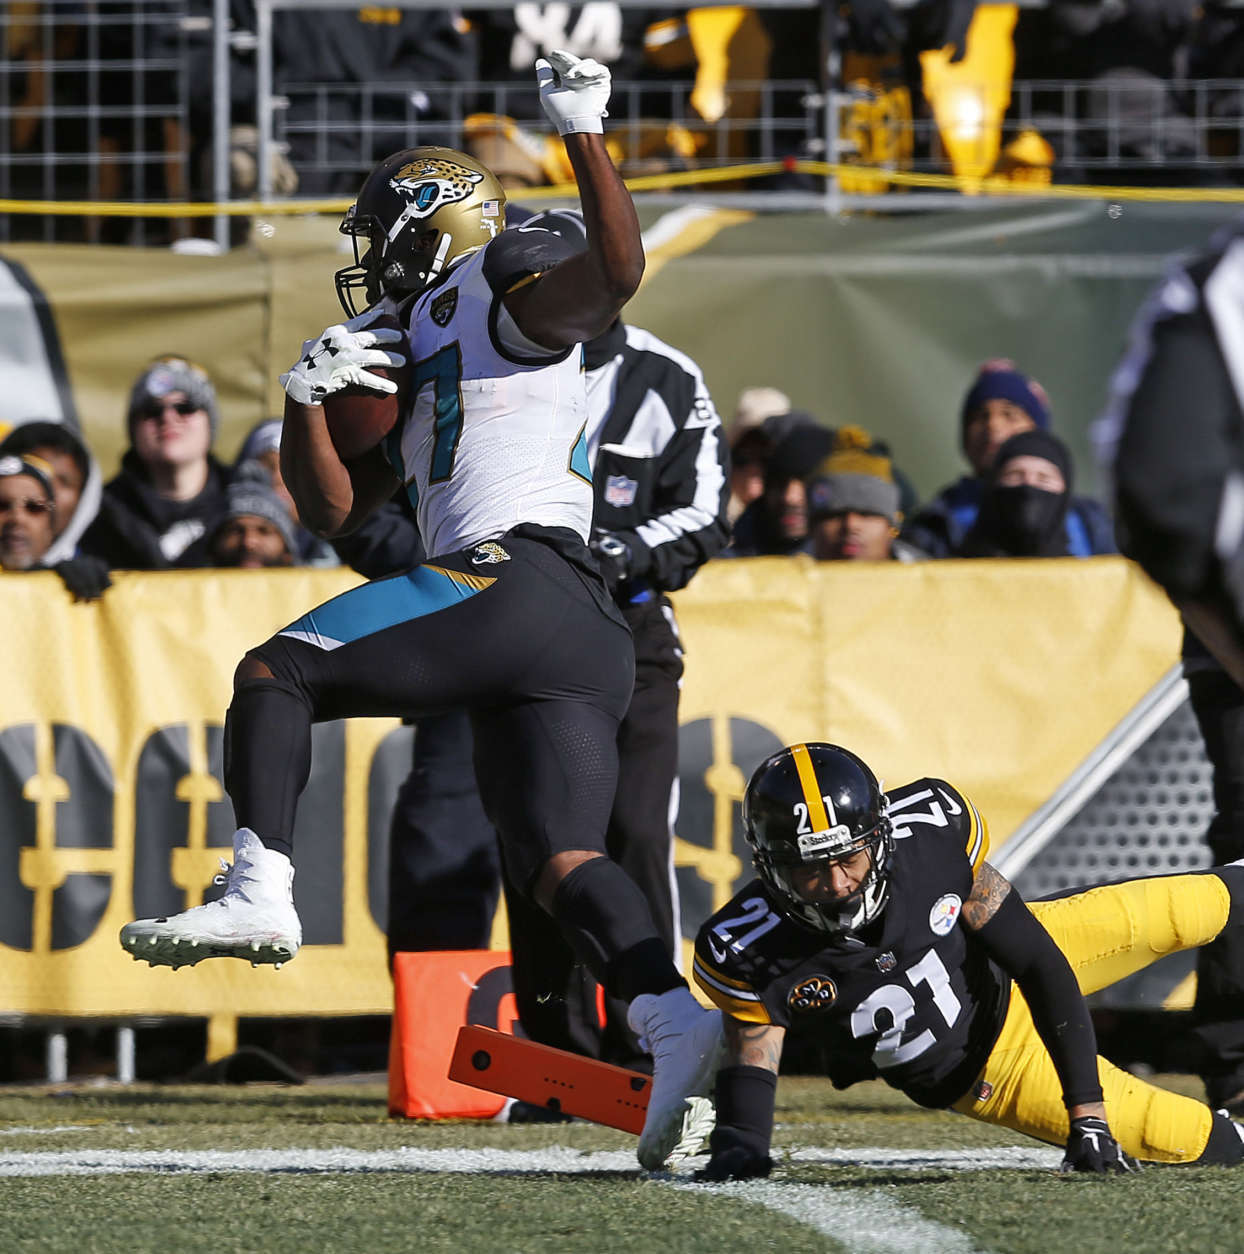 Jacksonville Jaguars running back Leonard Fournette (27) makes it into the end zone for a touchdown with Pittsburgh Steelers cornerback Joe Haden (21) defending during the first half of an NFL divisional football AFC playoff game in Pittsburgh, Sunday, Jan. 14, 2018. (AP Photo/Keith Srakocic)